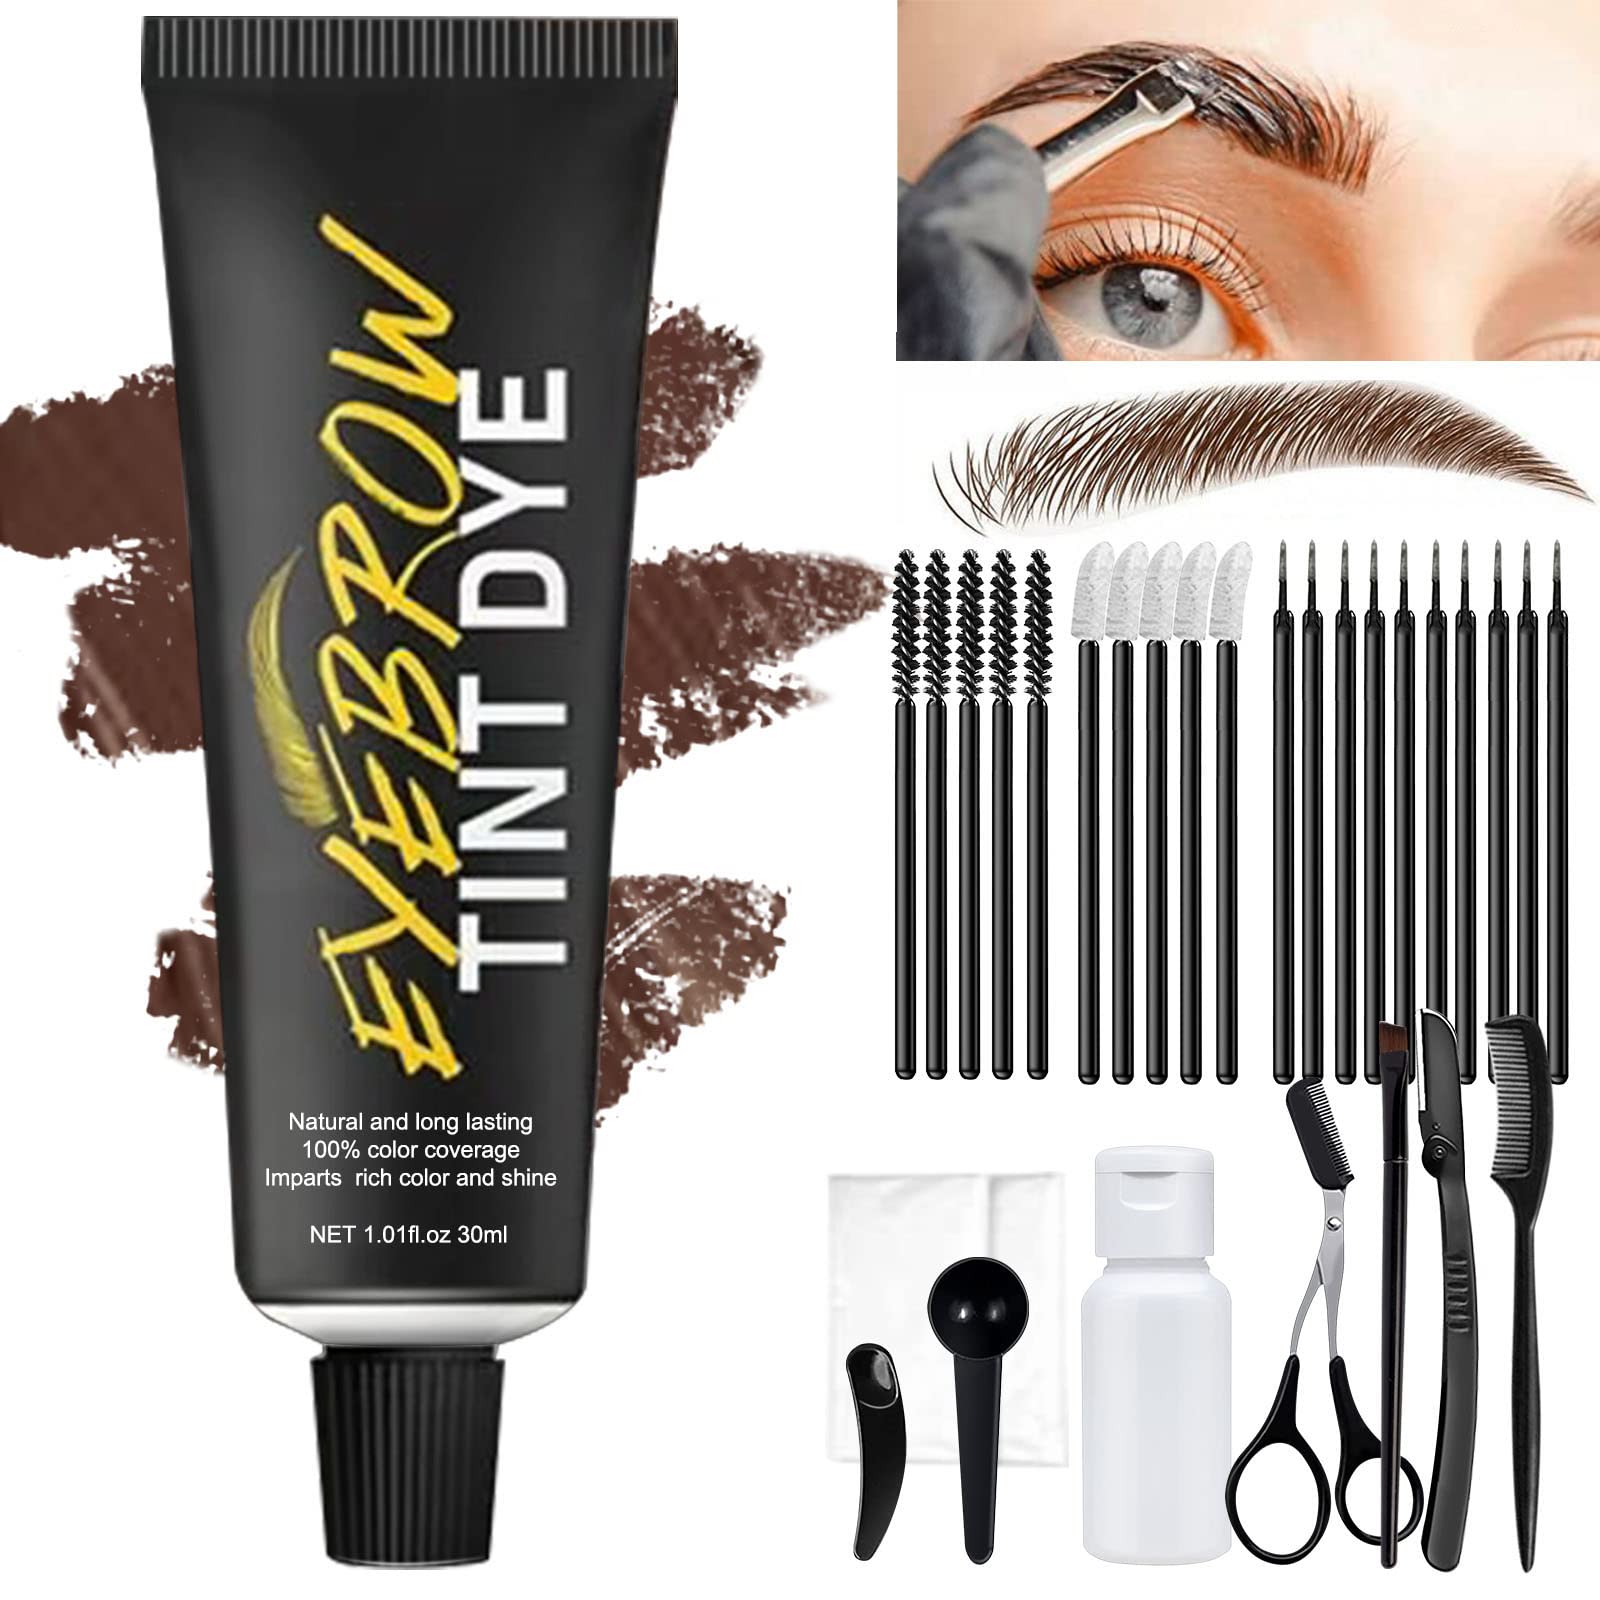 Instant Eyebrow Tinting Color Kit Natural and Professional Eyebrow